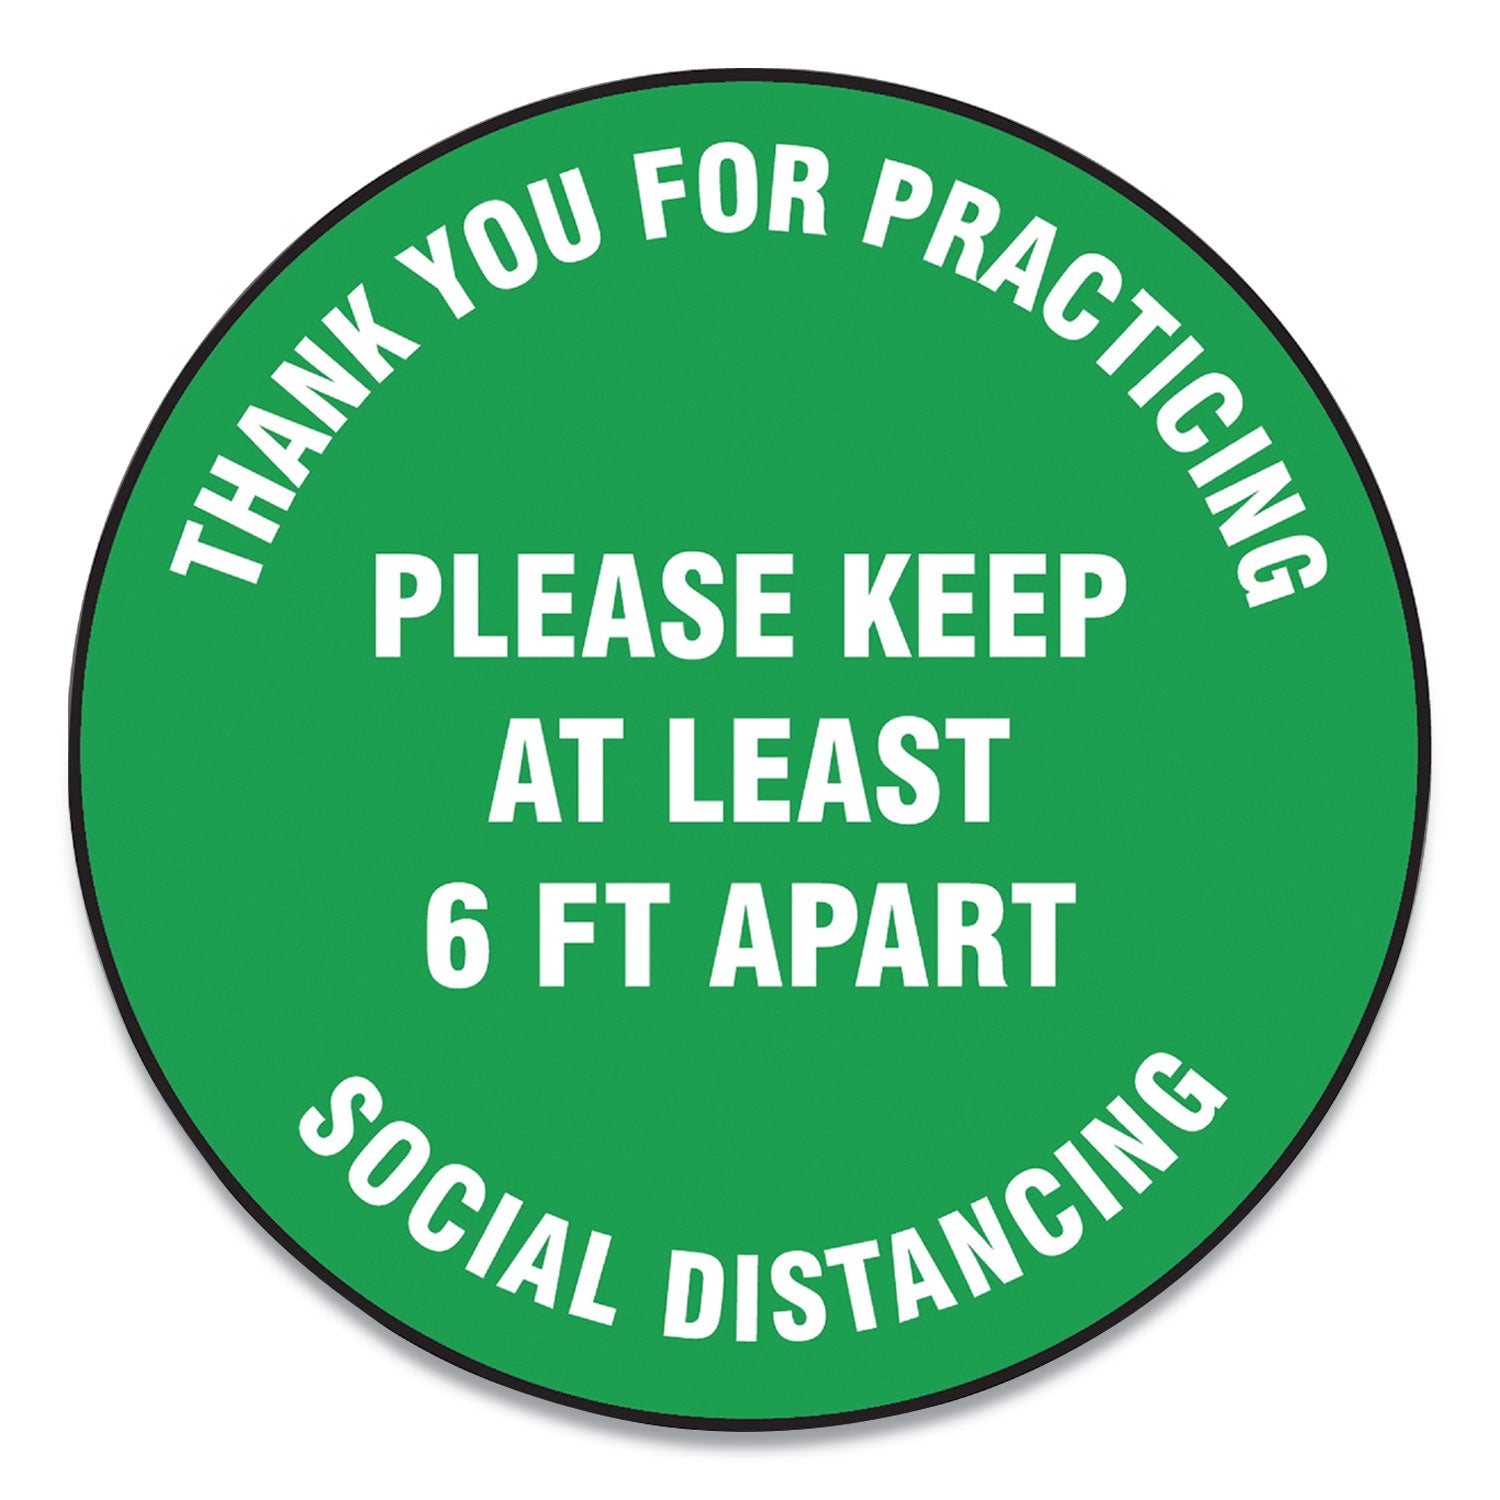 slip-gard-floor-signs-17-circle-thank-you-for-practicing-social-distancing-please-keep-at-least-6-ft-apart-green-25-pk_gn1mfs425esp - 1